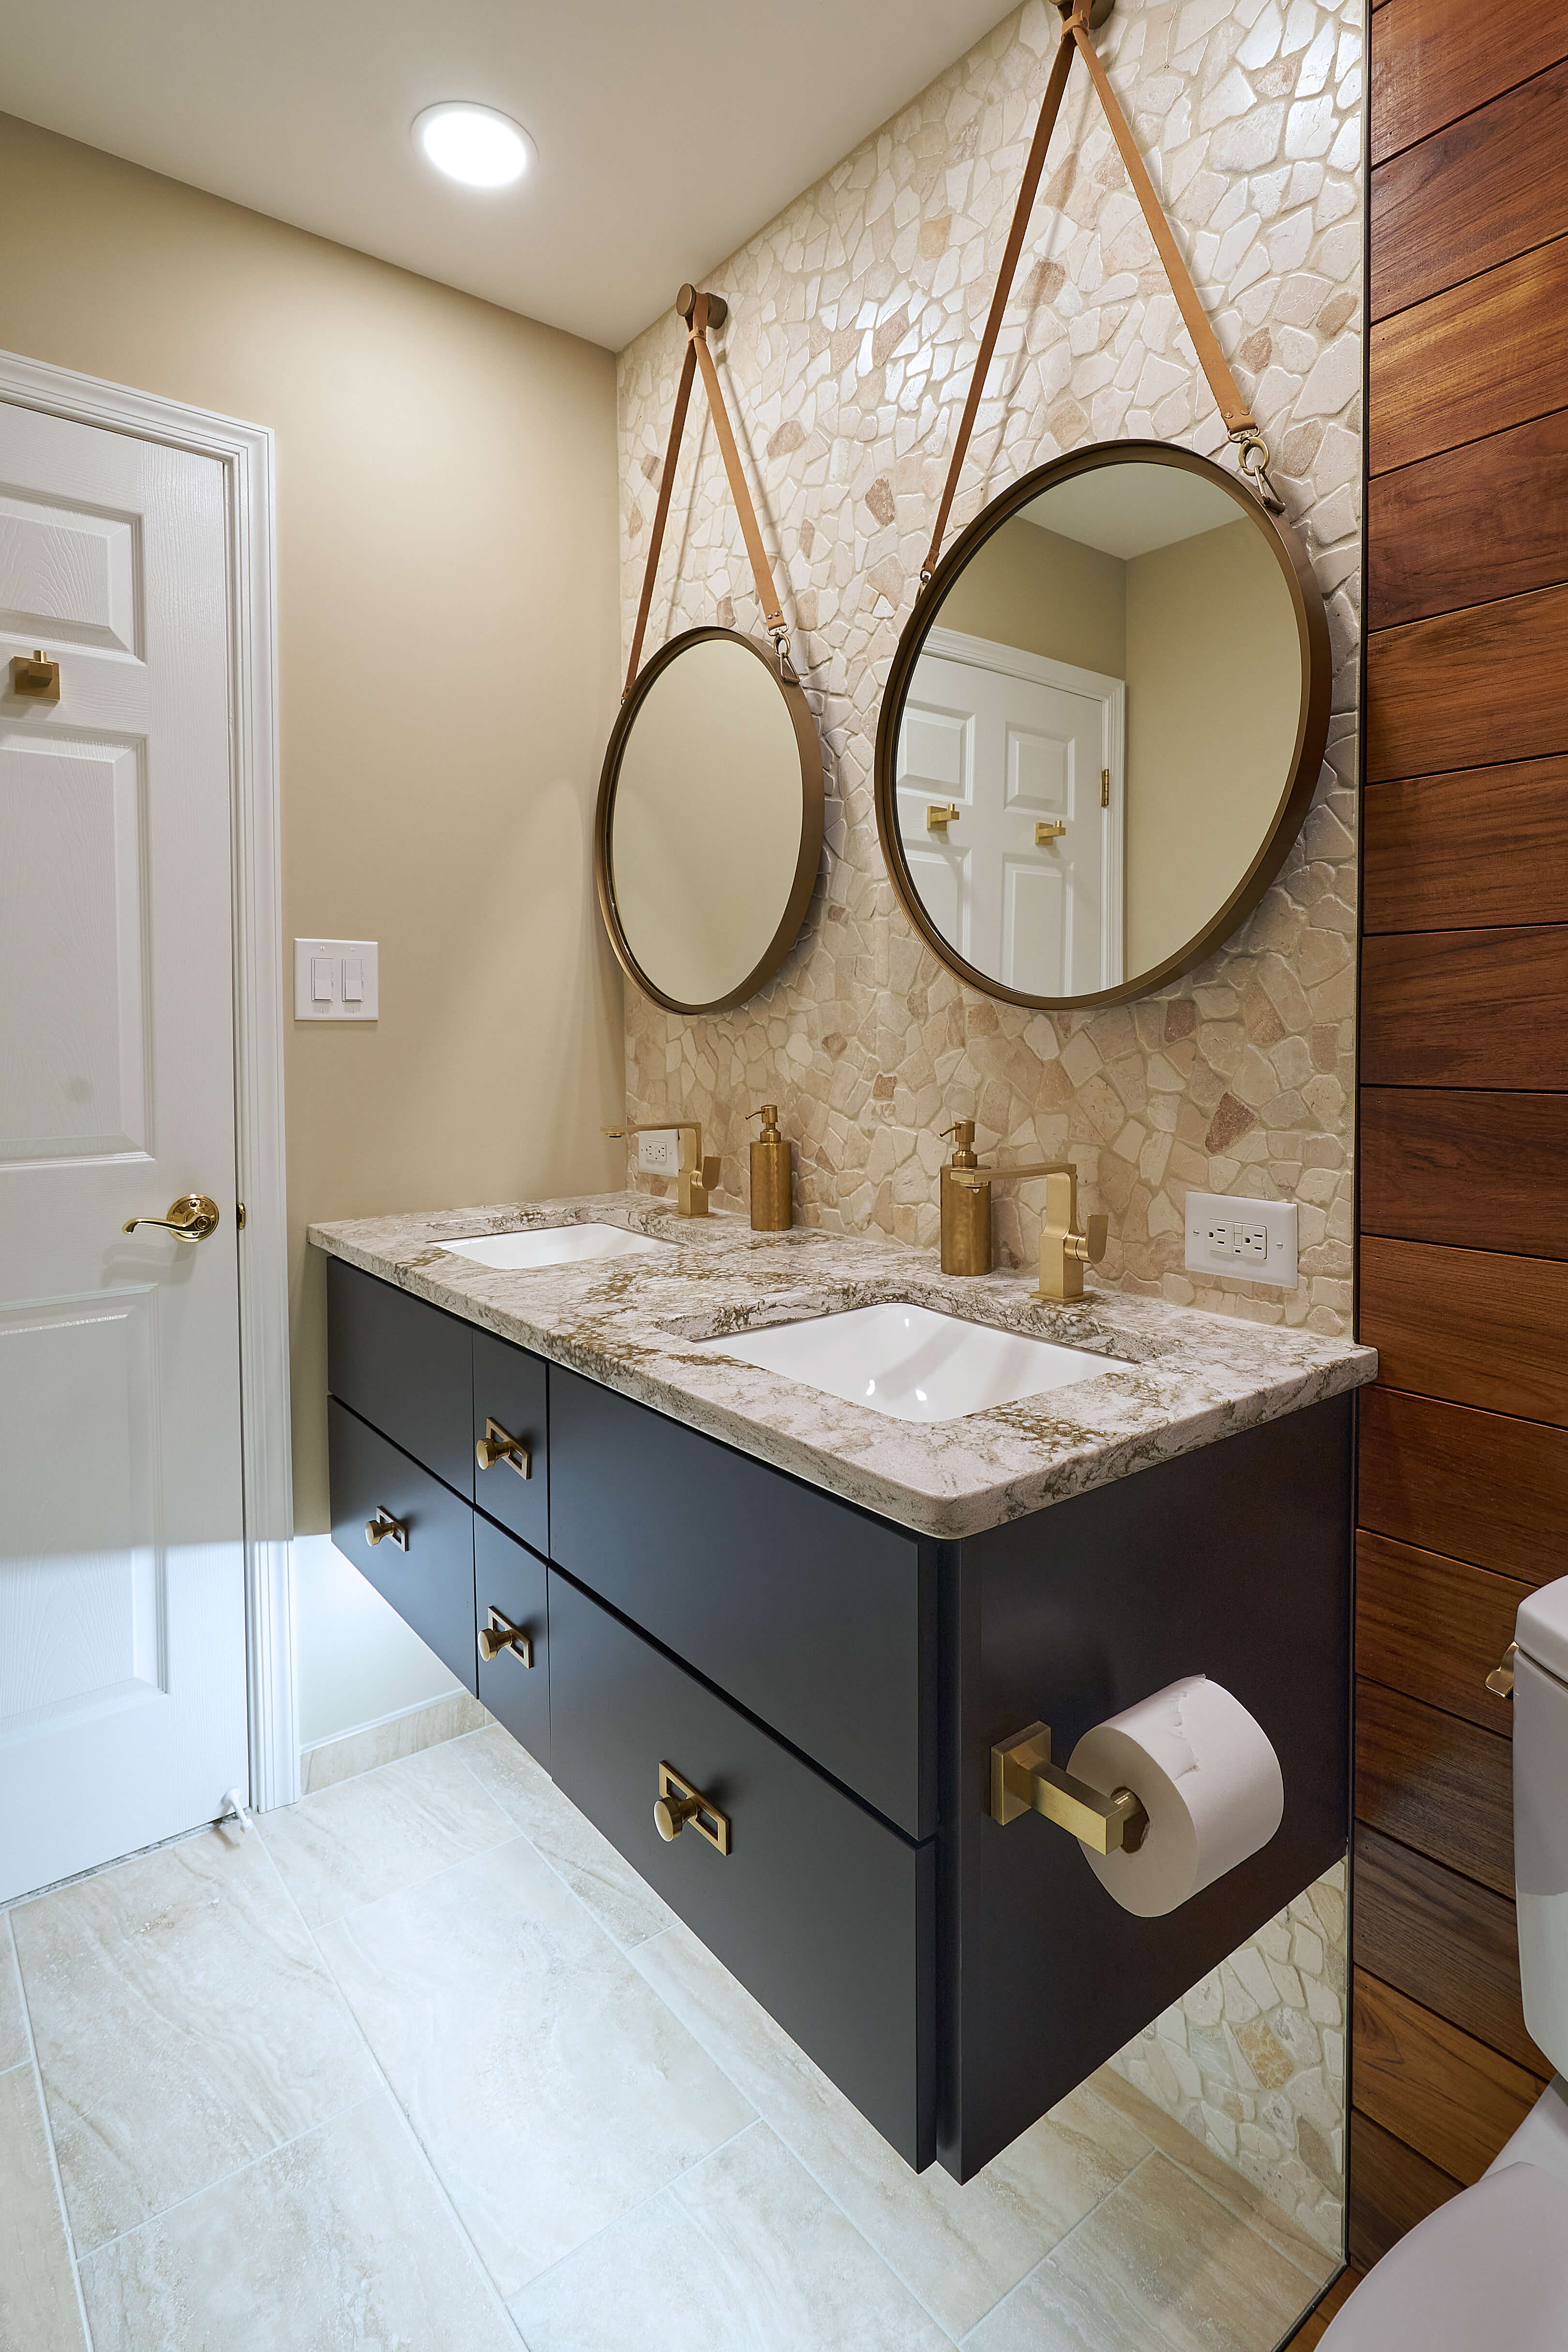 A contemporary bathroom design with warm stone and wood wall paneling featuring a modern black painted wall hung vanity with two bathroom sinks and two round rope-hanging vanity mirrors.